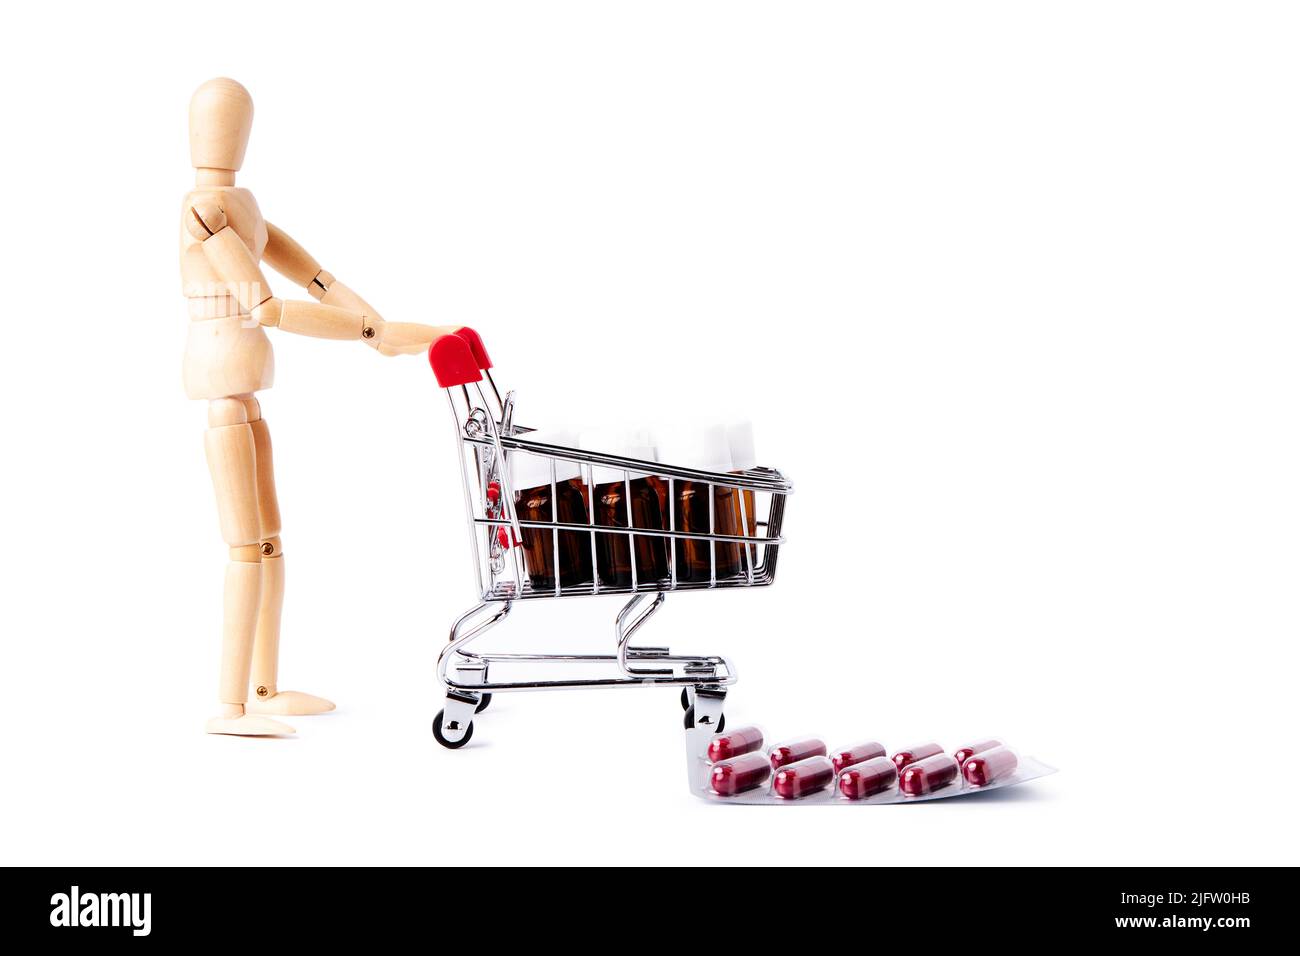 Dummy pushing shopping cart full of medicine jars and pills on the floor. Medicine and health concept Stock Photo